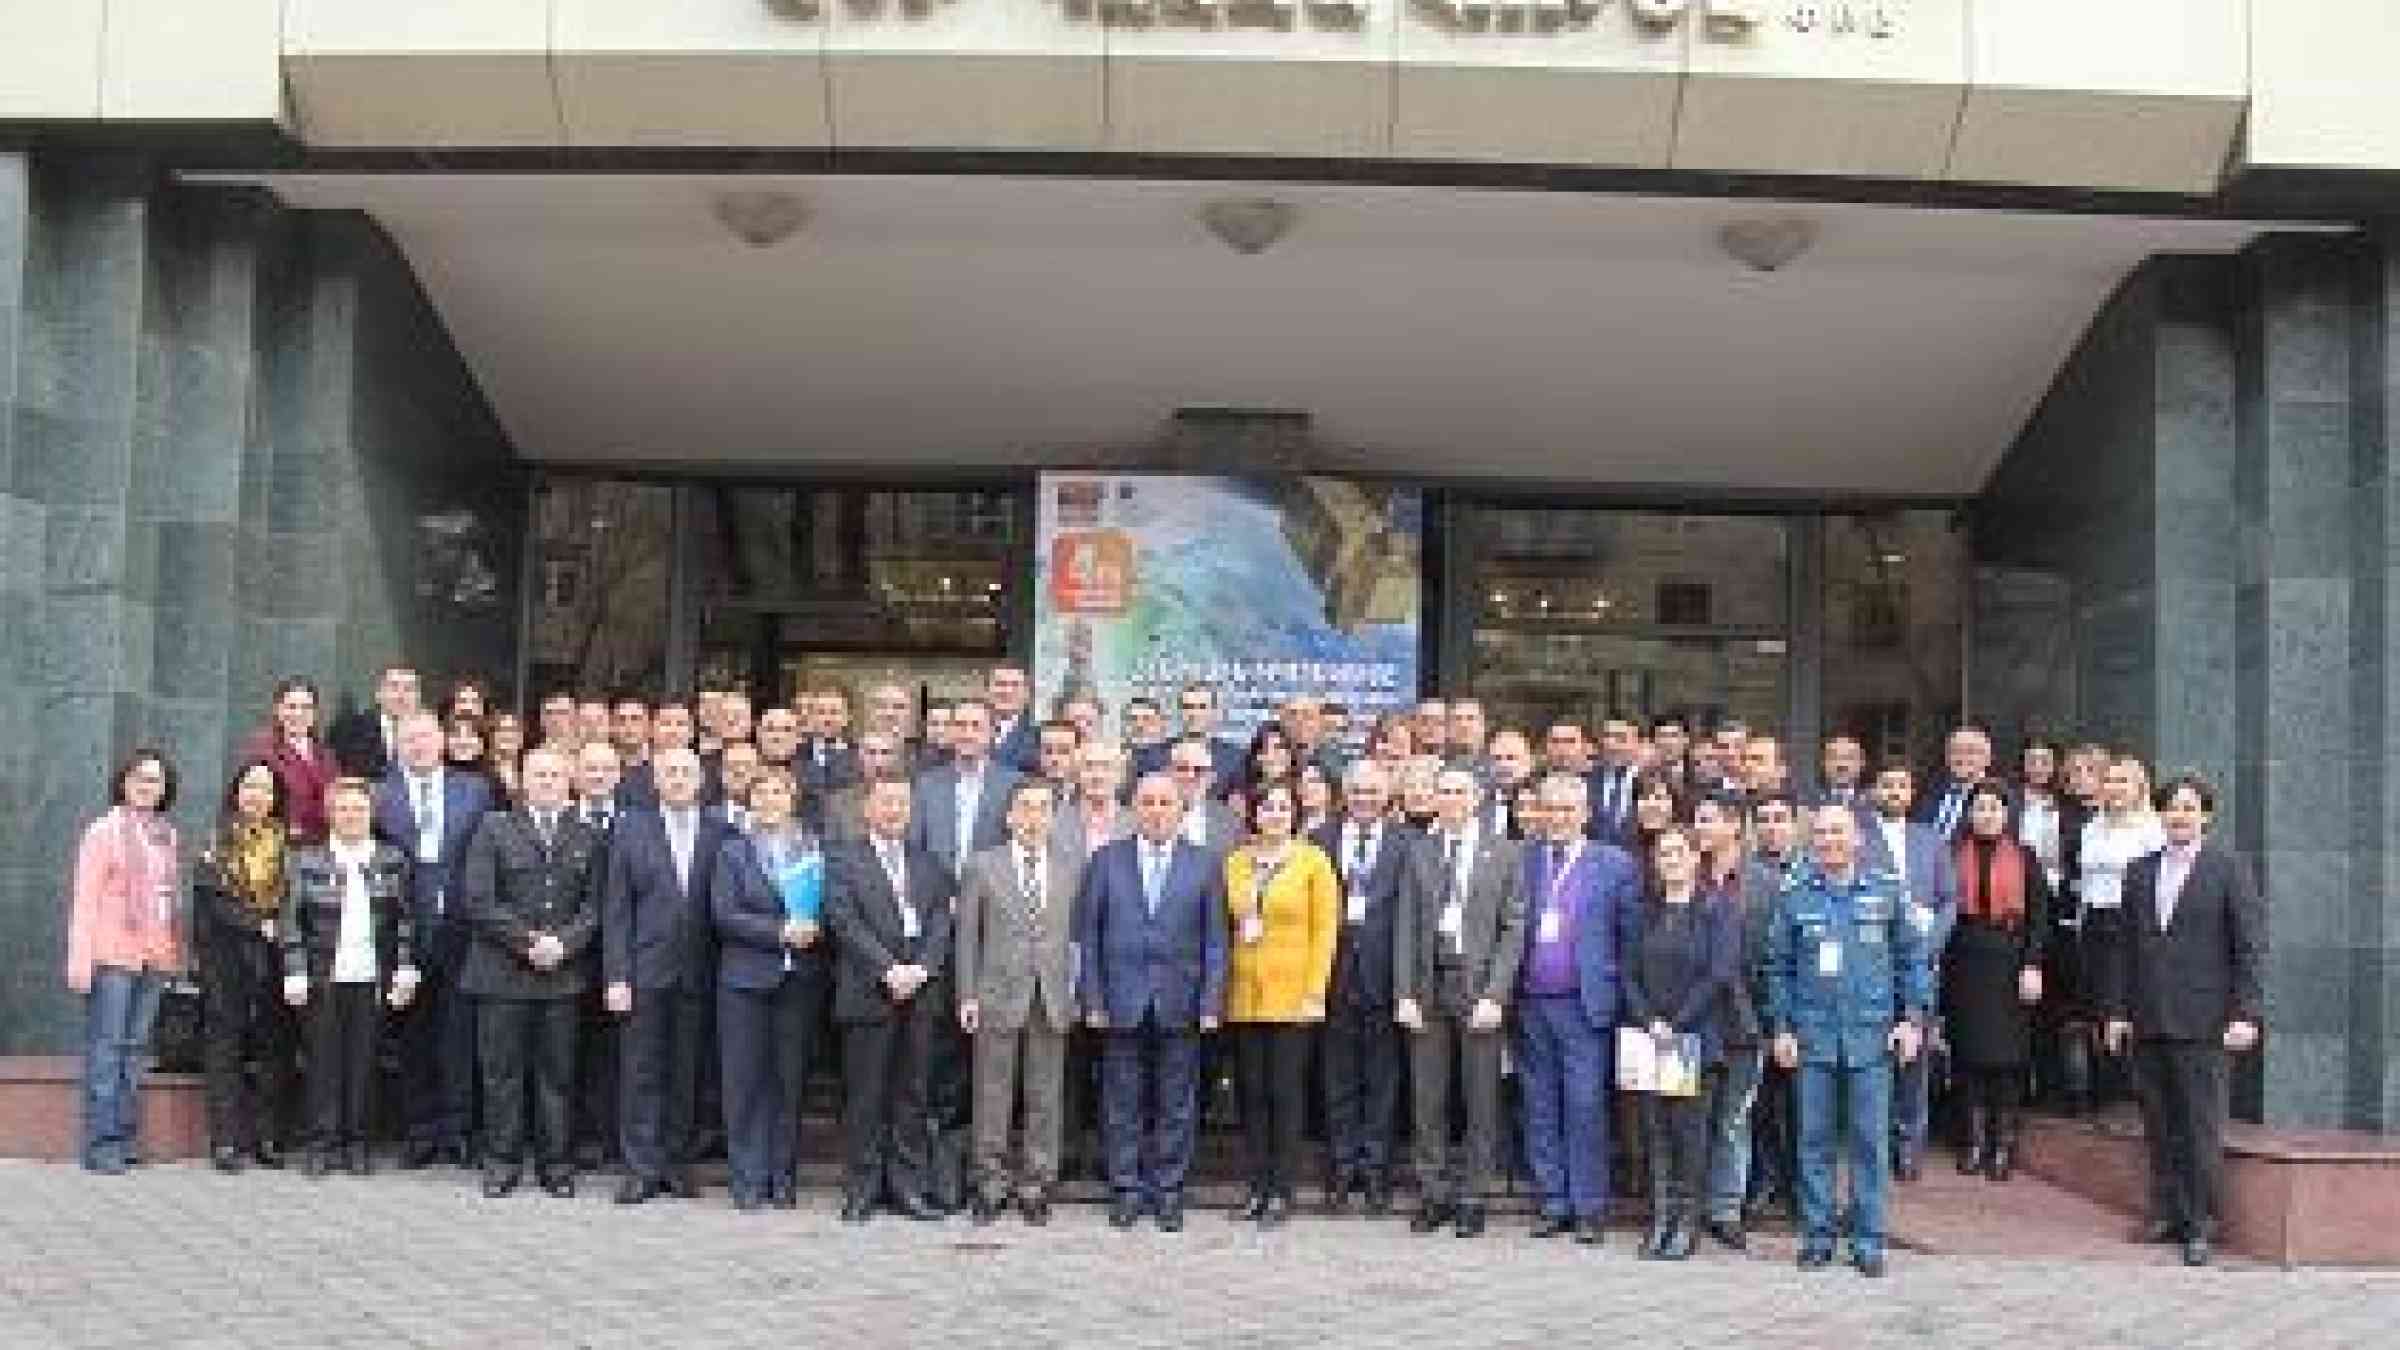 Participants at the 4th International Conference on Public Awareness as a Cornerstone of Disaster Risk Reduction and Sustainable Development, meeting in the Armenian capital Yerevan (Photo: MTES)